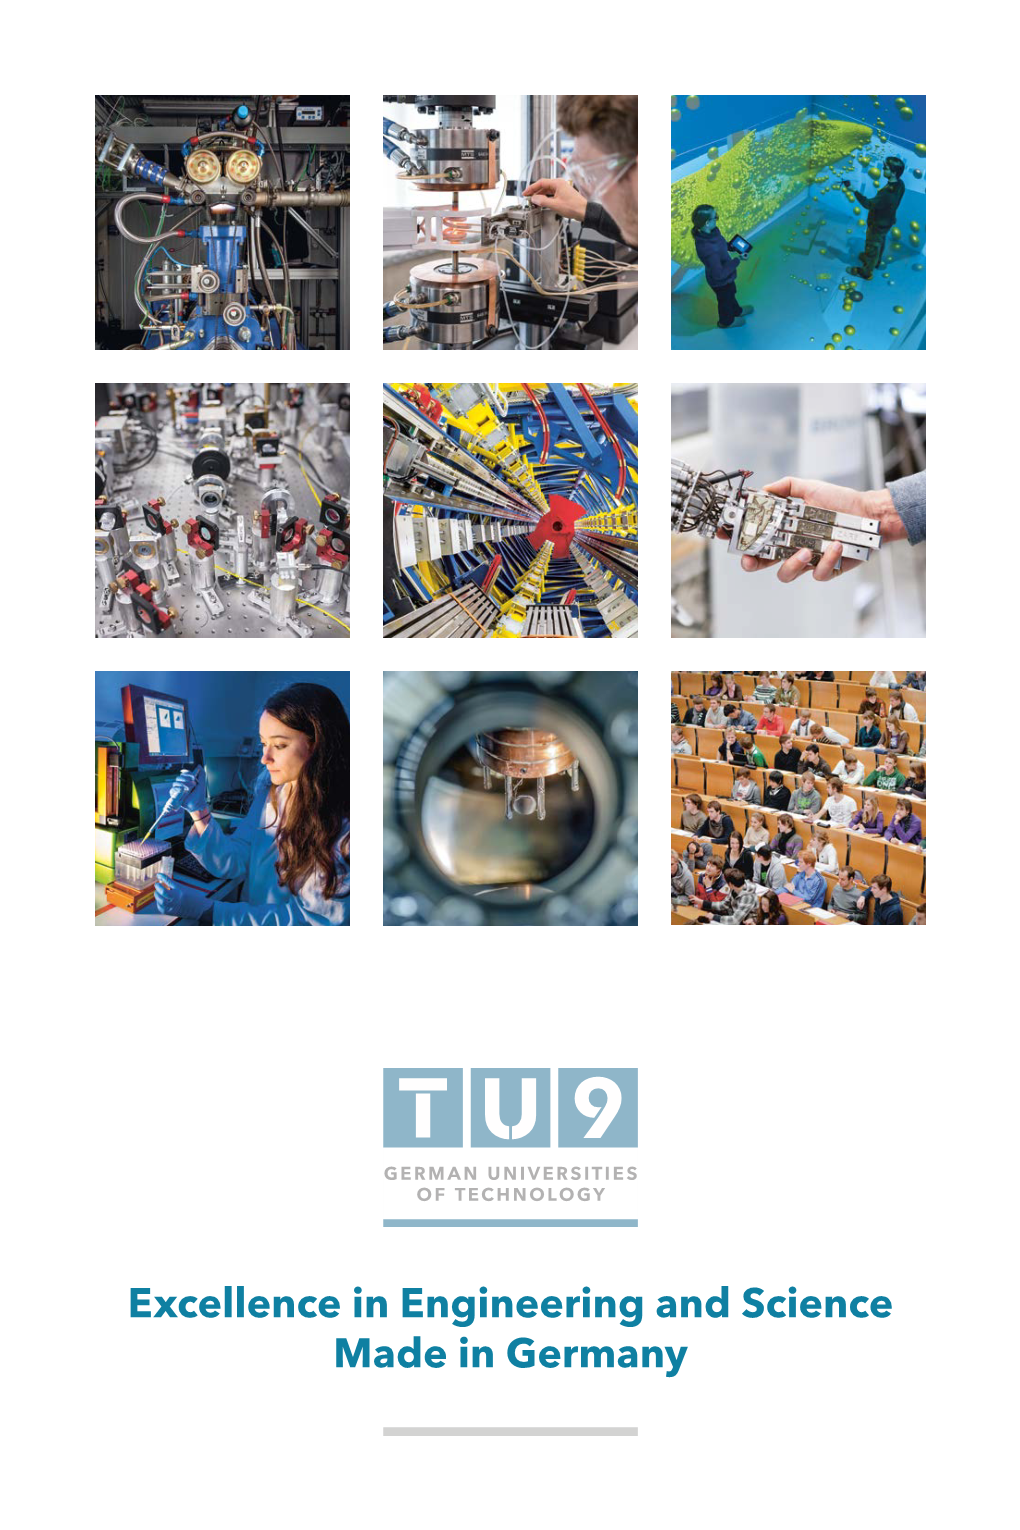 Excellence in Engineering and Science Made in Germany TU9 Alliance